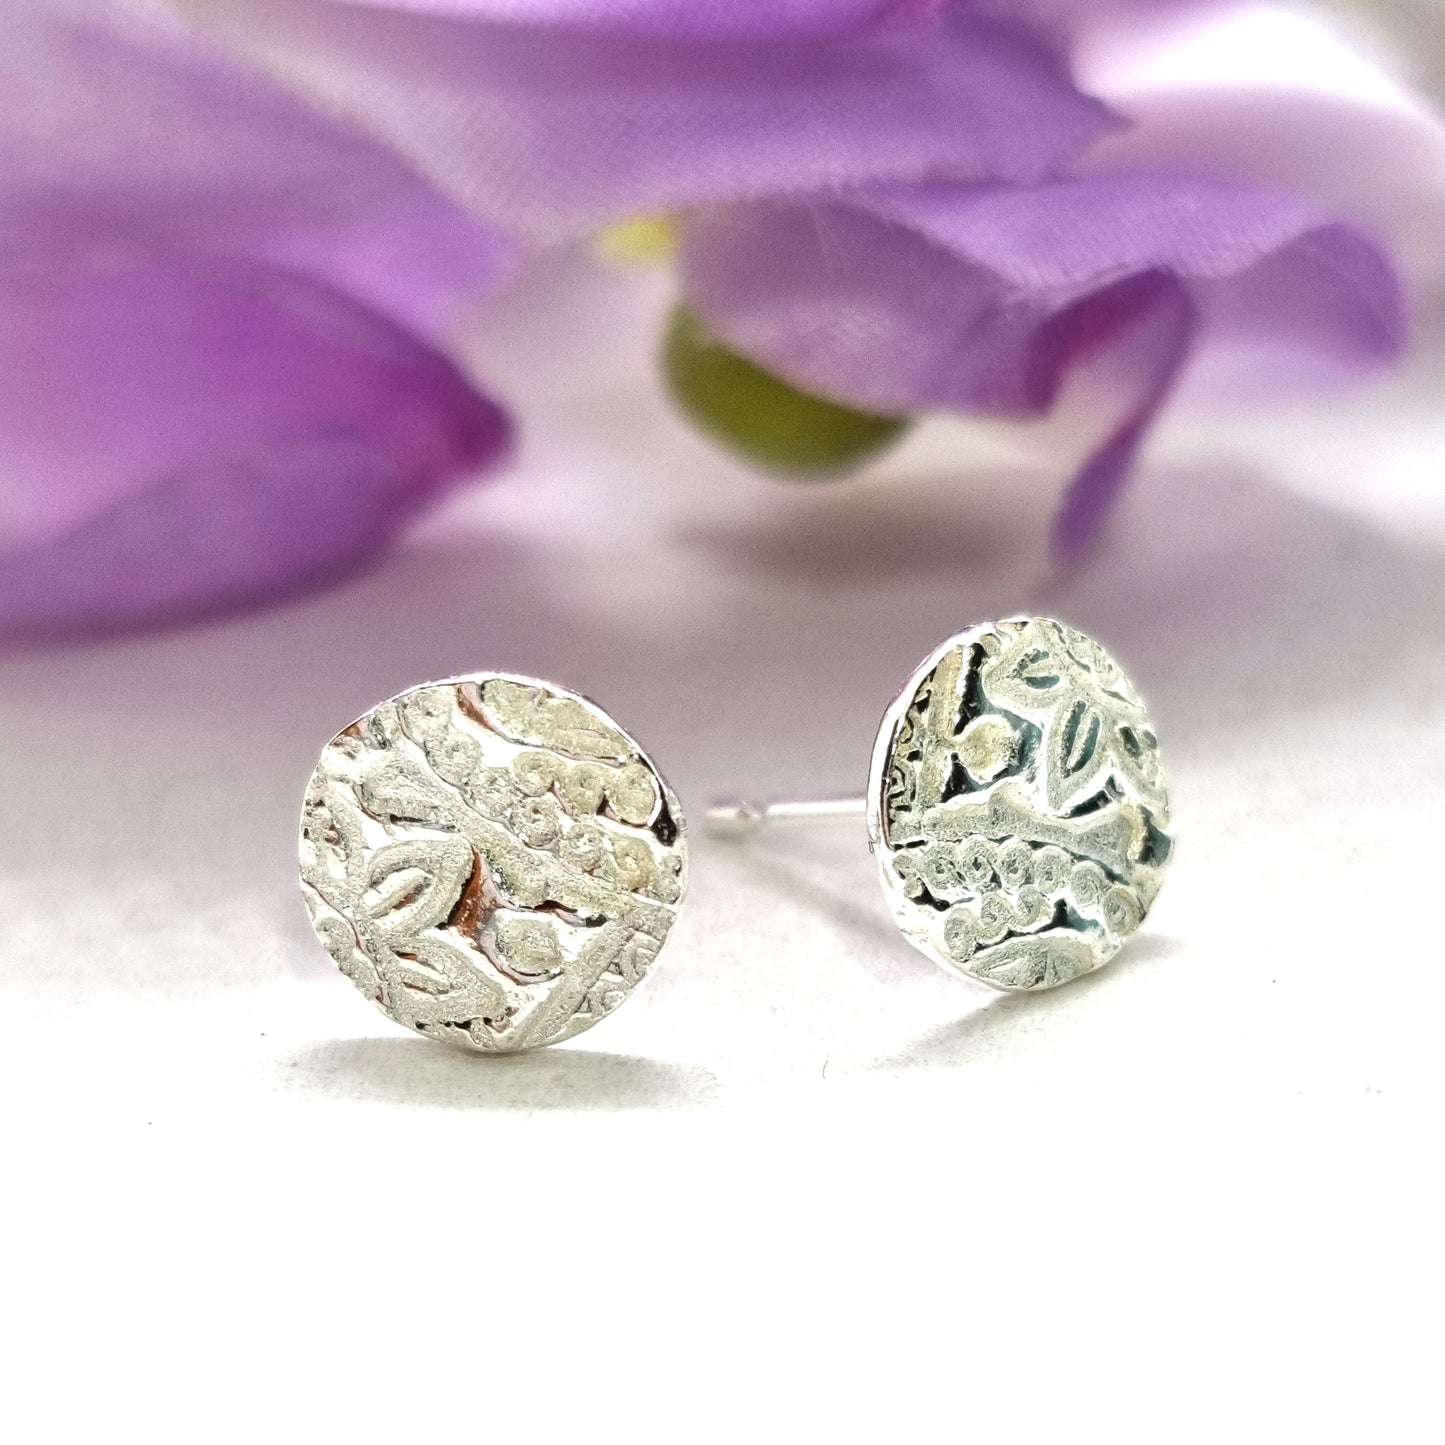 Round silver stud earrings with pattern with flowers